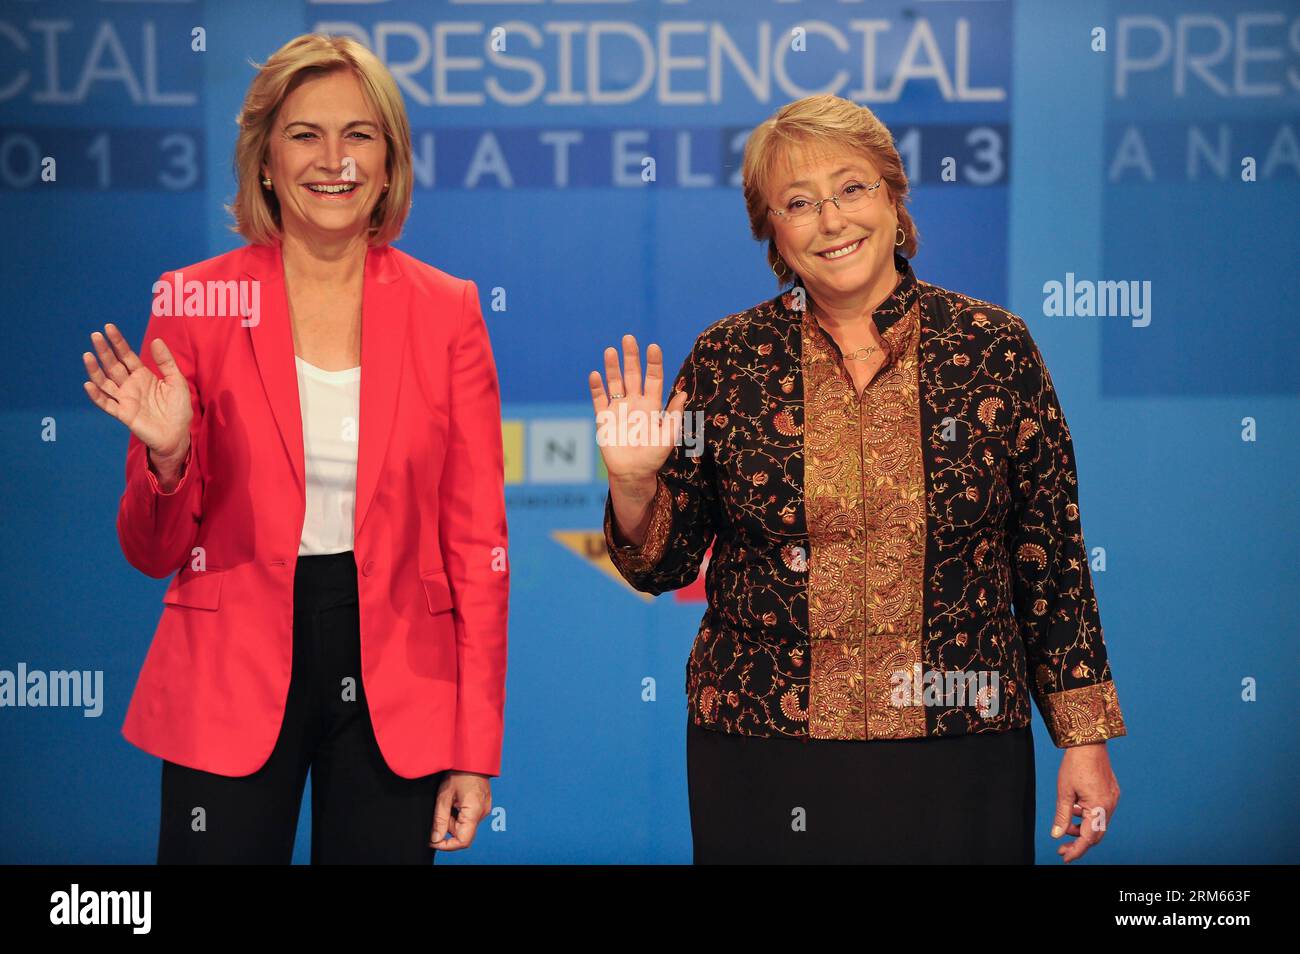 Bildnummer: 60815802  Datum: 10.12.2013  Copyright: imago/Xinhua     SANTIAGO, Dec. 10, 2013 -- The presidential candidate by officialist Aliance Party for Chile, Evelyn Matthei (i), and presidential candidate by electoral coalition New Majority Pact, Michelle Bachelet (d), attend a TV discussion held by Television National Asociation (ANATEL), in the way for Chile s 2014 presidential elections, at TVN Channel facilities, in Santiago, capital of Chile, Dec. 10, 2013.   (Xinhua/Jorge Villegas) (rh) (da) CHILE-SANTIAGO-POLITICS-DEBATE PUBLICATIONxNOTxINxCHN Politik people Wahl Präsidentschaftswa Stock Photo